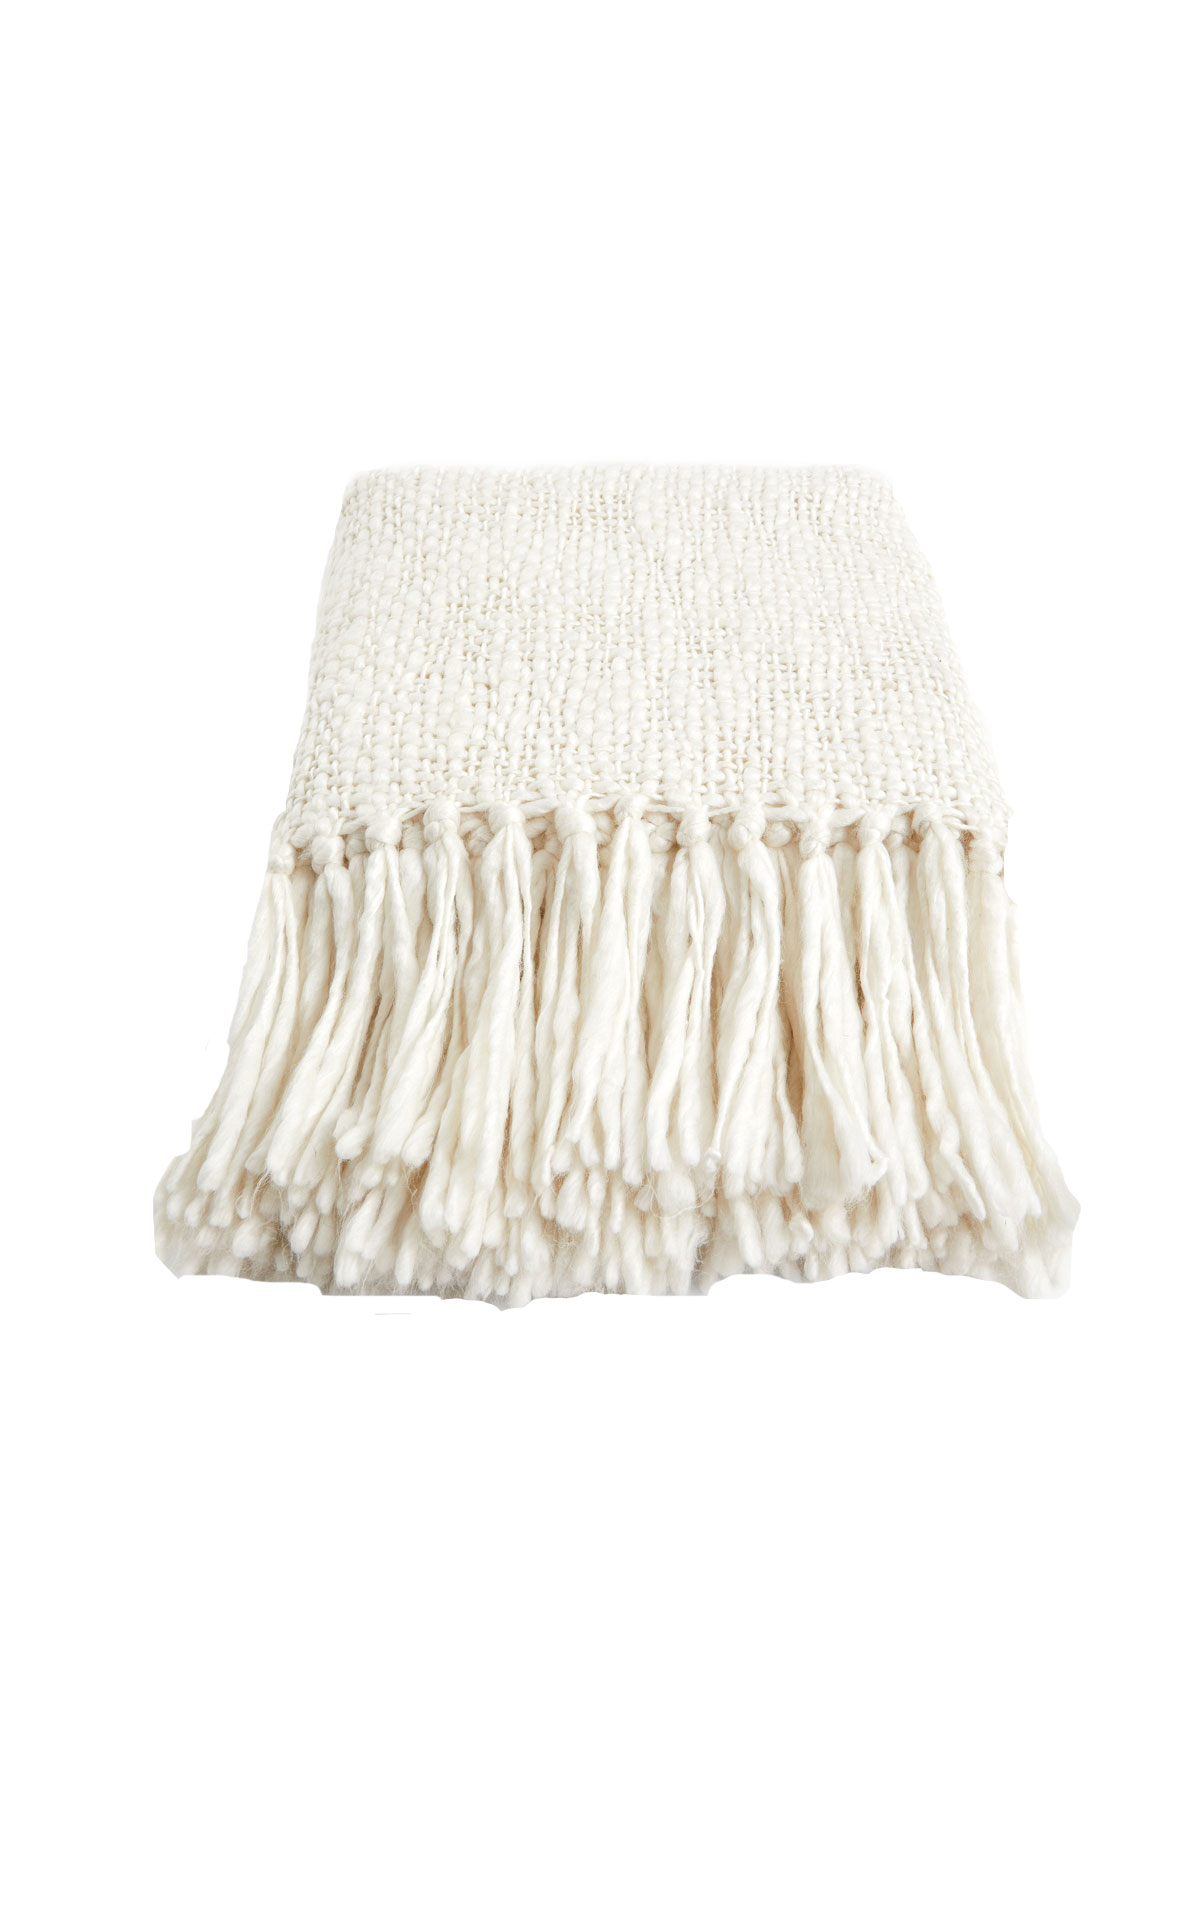 Soho Home Hathaway throw cream from Bicester Village